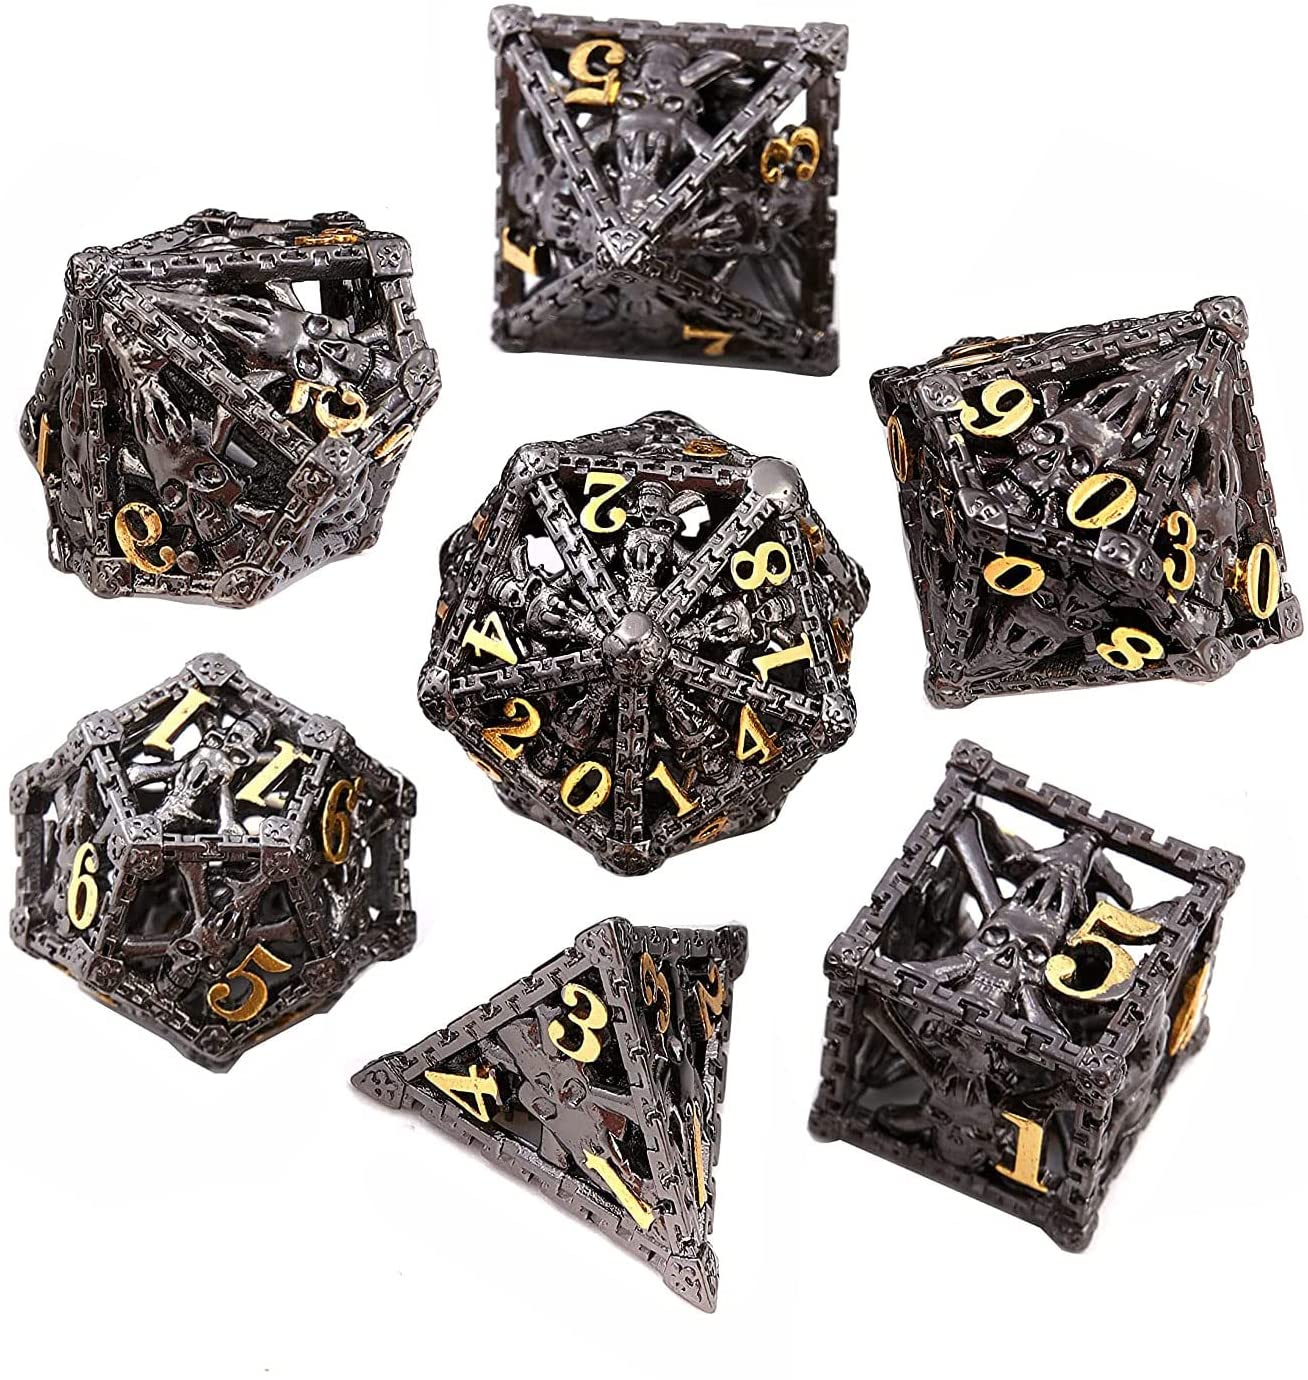 DND Dice Set Polyhedron Dice Skull Hollow Metal Dice for Dungeons and Dragons Role Playing Games PCCECQEE Dice 7PCS D&D Set Collection Gifts Bronze-02 